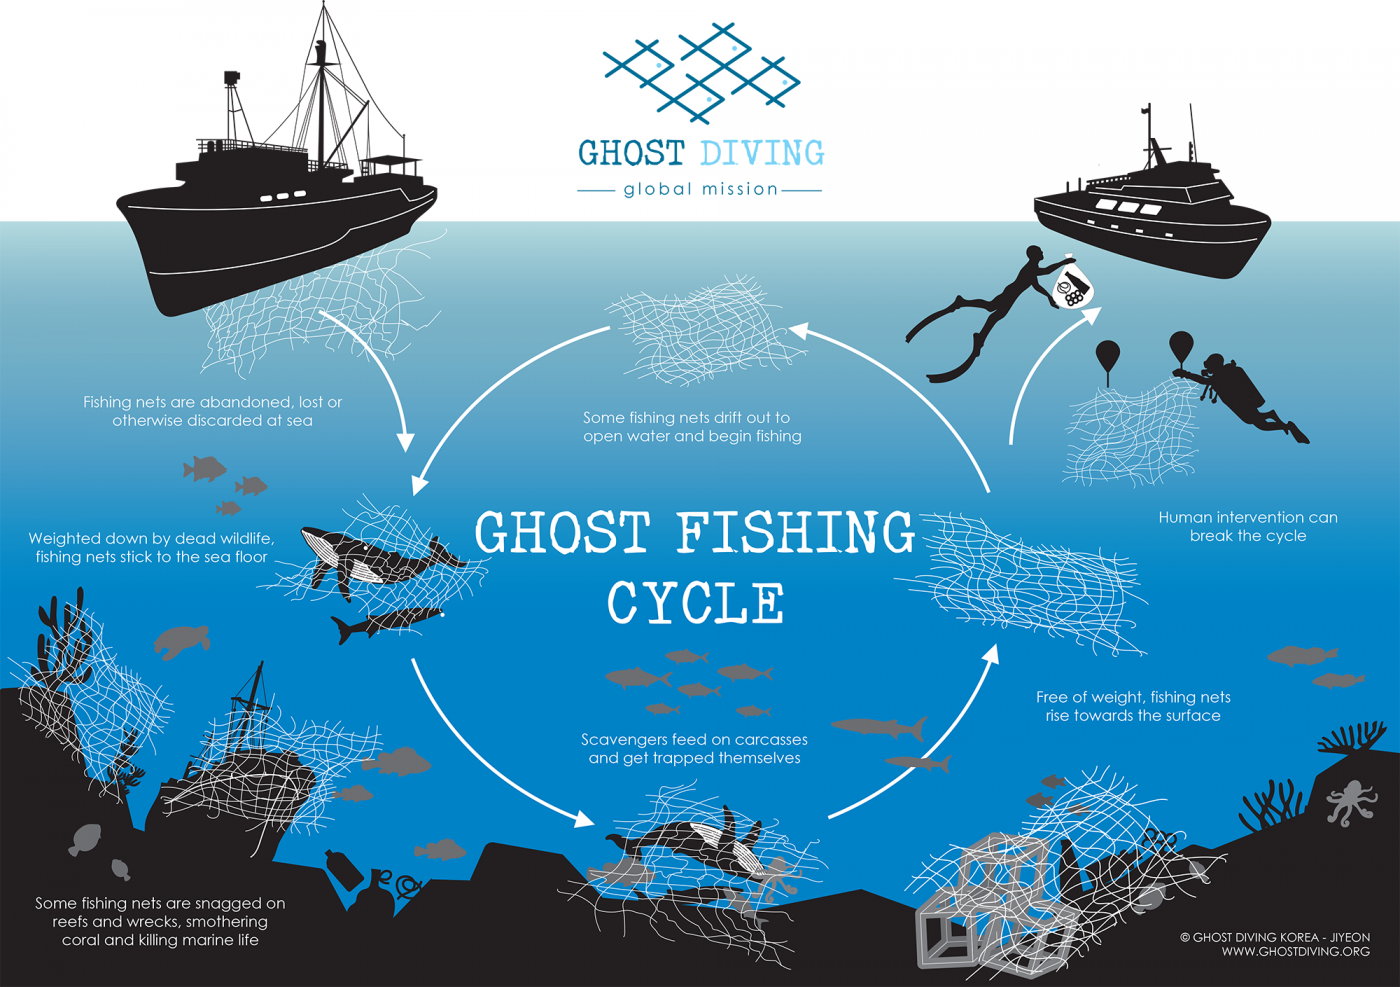 Ghost Fishing, It's really as bad as it sounds — R/V PILAR